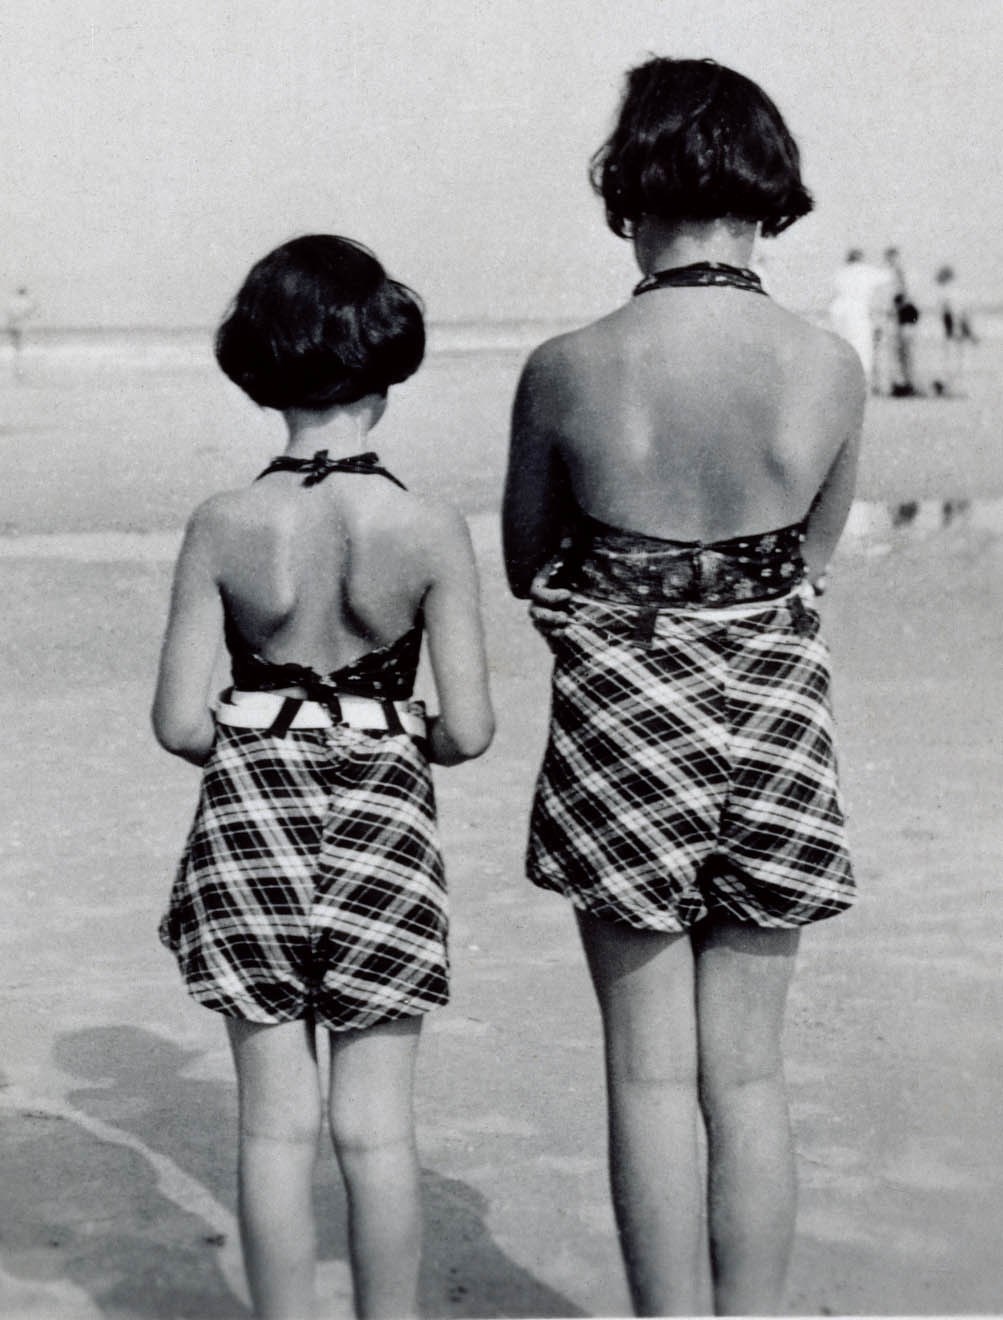 Margot and Anne at the beach. Image courtesy of the Anne Frank Trust.